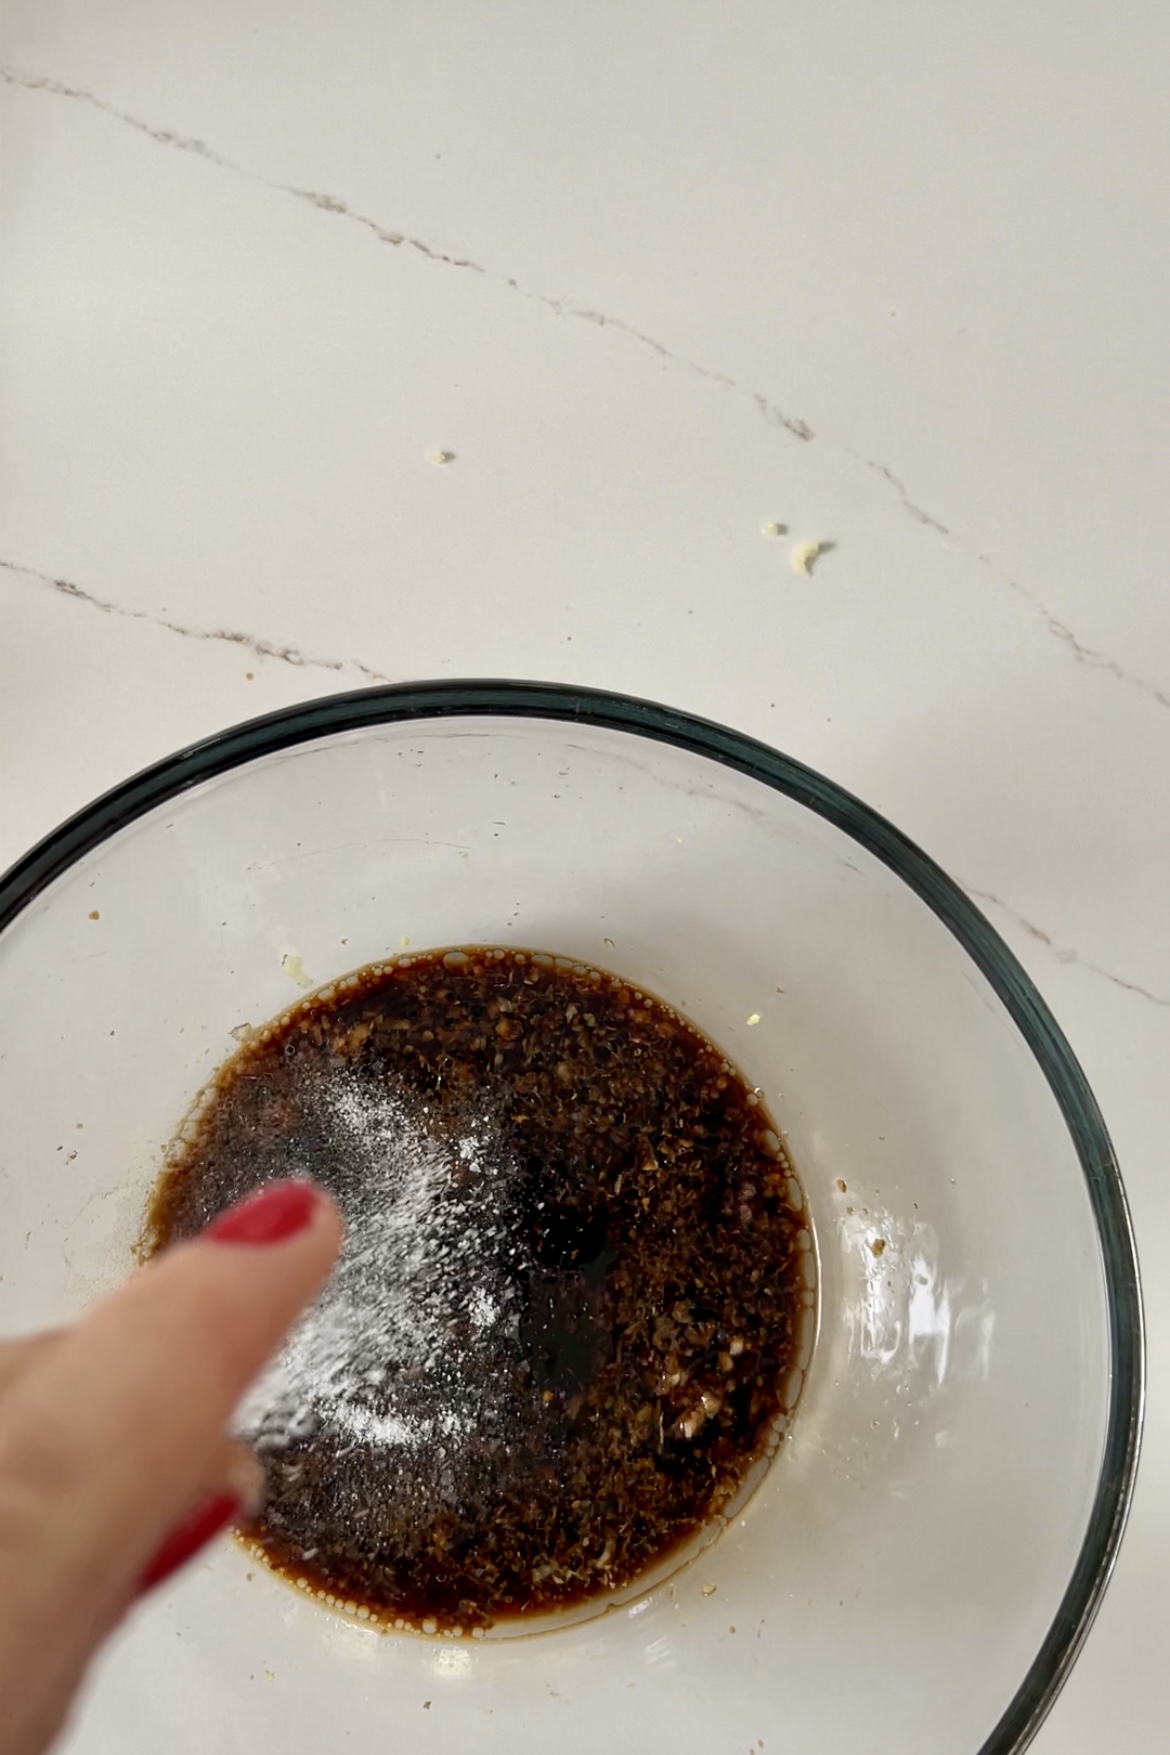 A person sprinkling brown sugar into a bowl while preparing stir-fry noodles.